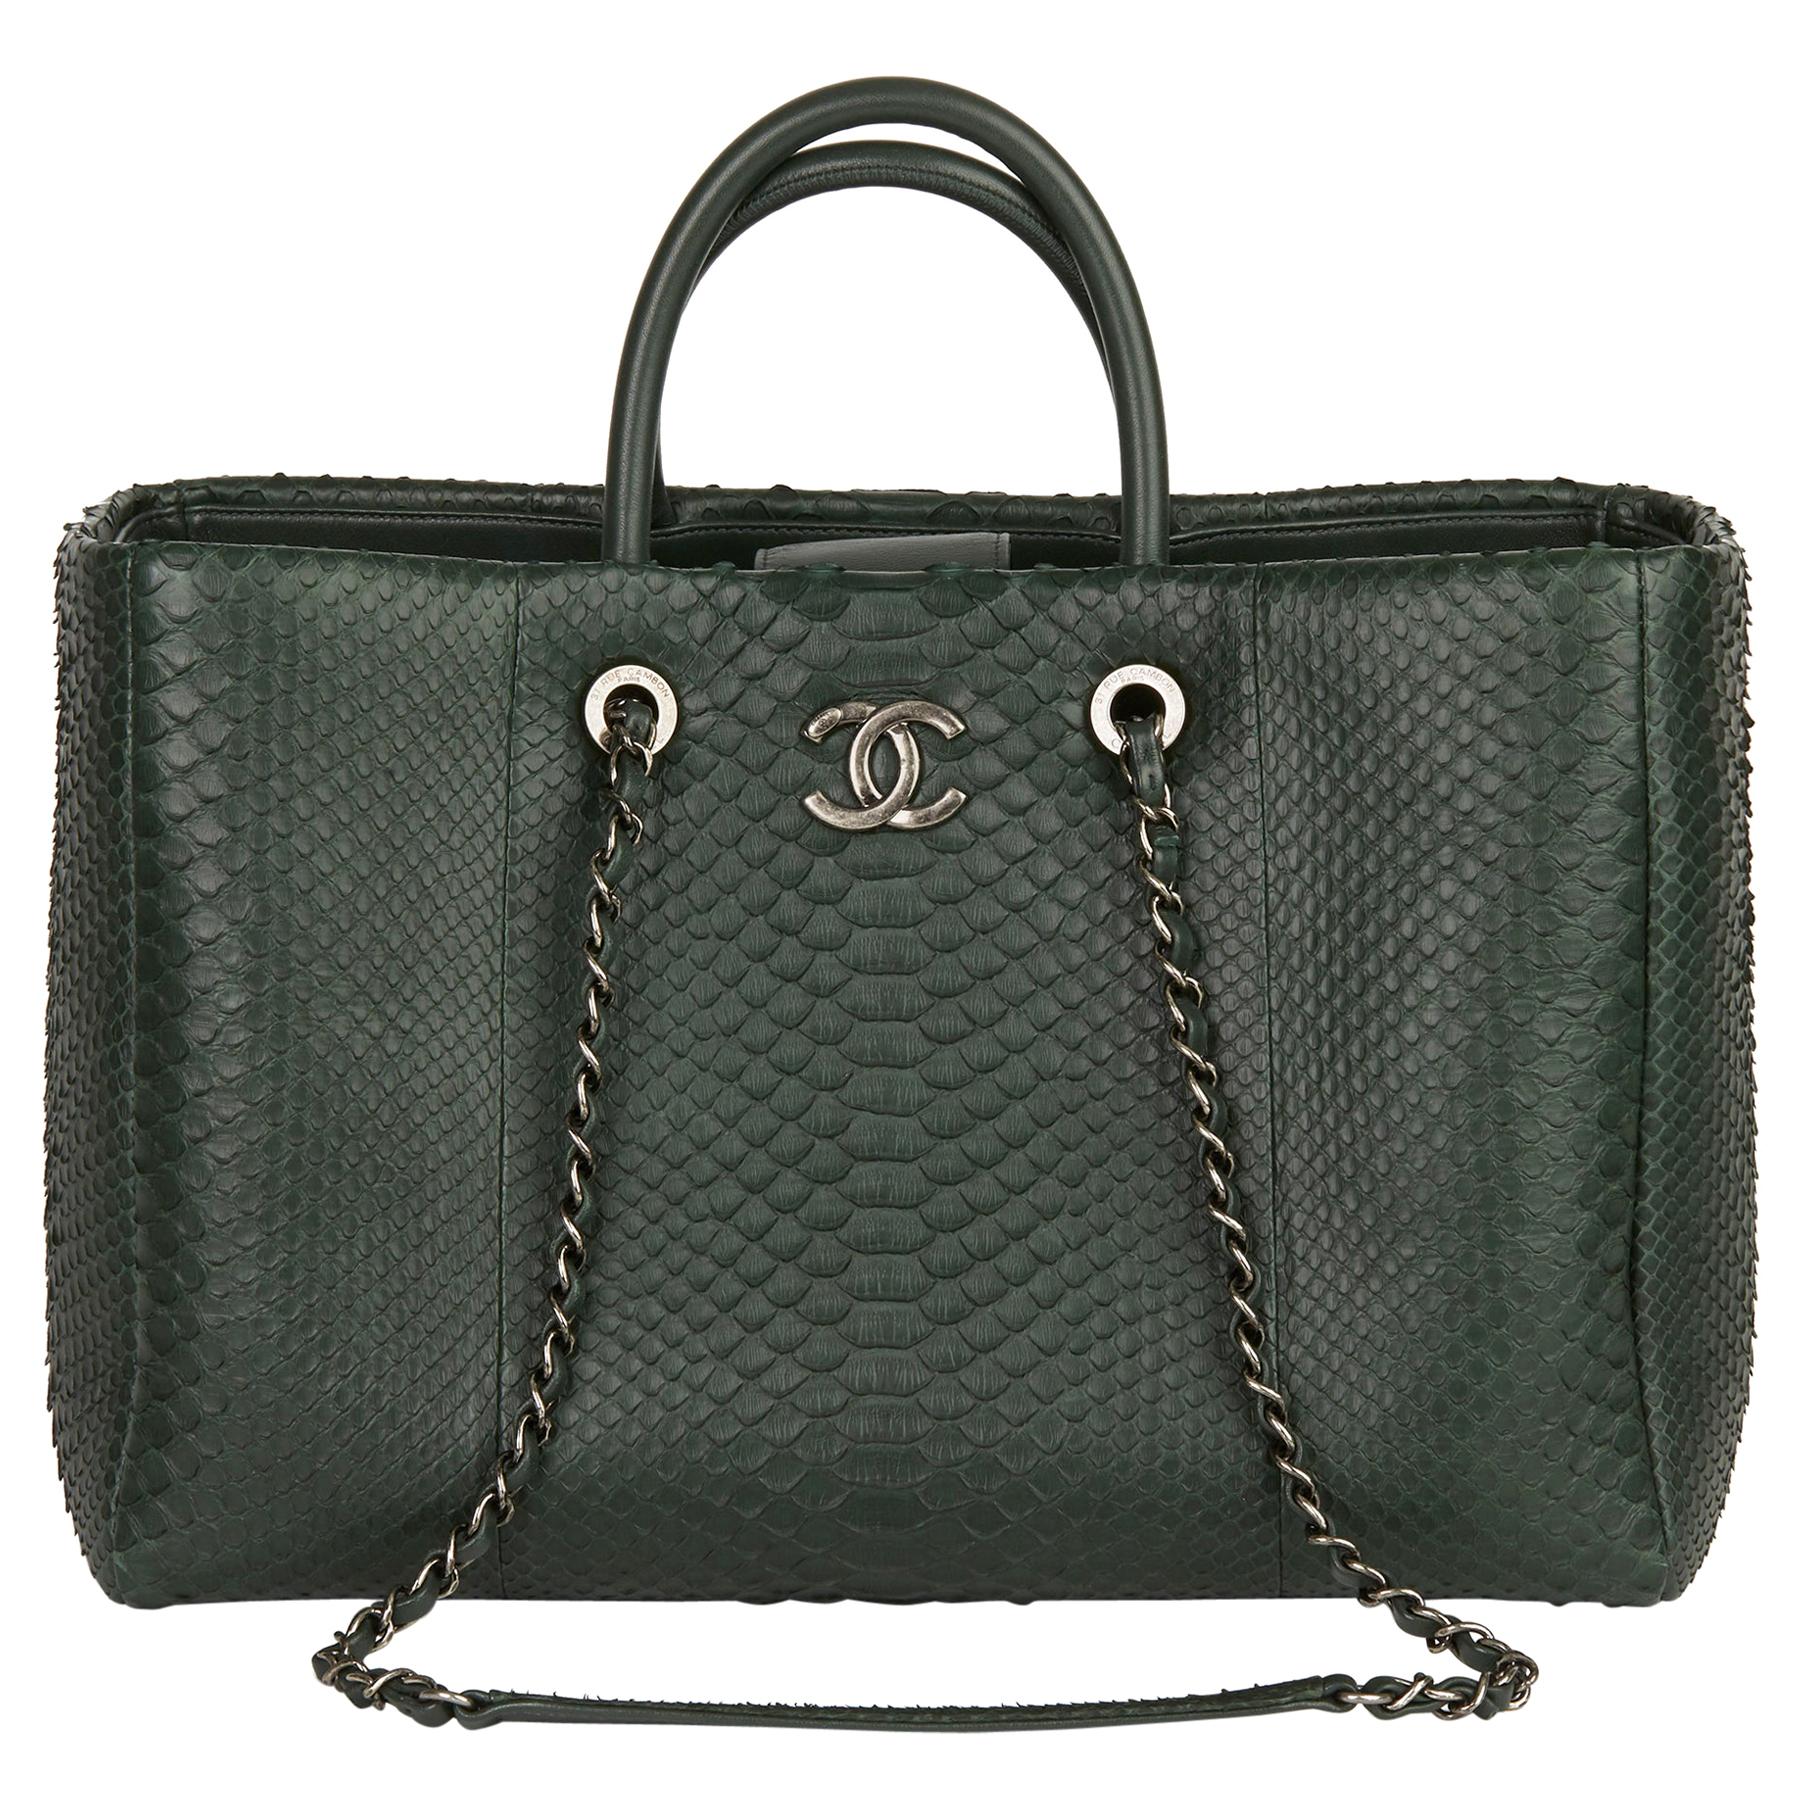 2017 Chanel Dark Green Python Leather Shopping Tote